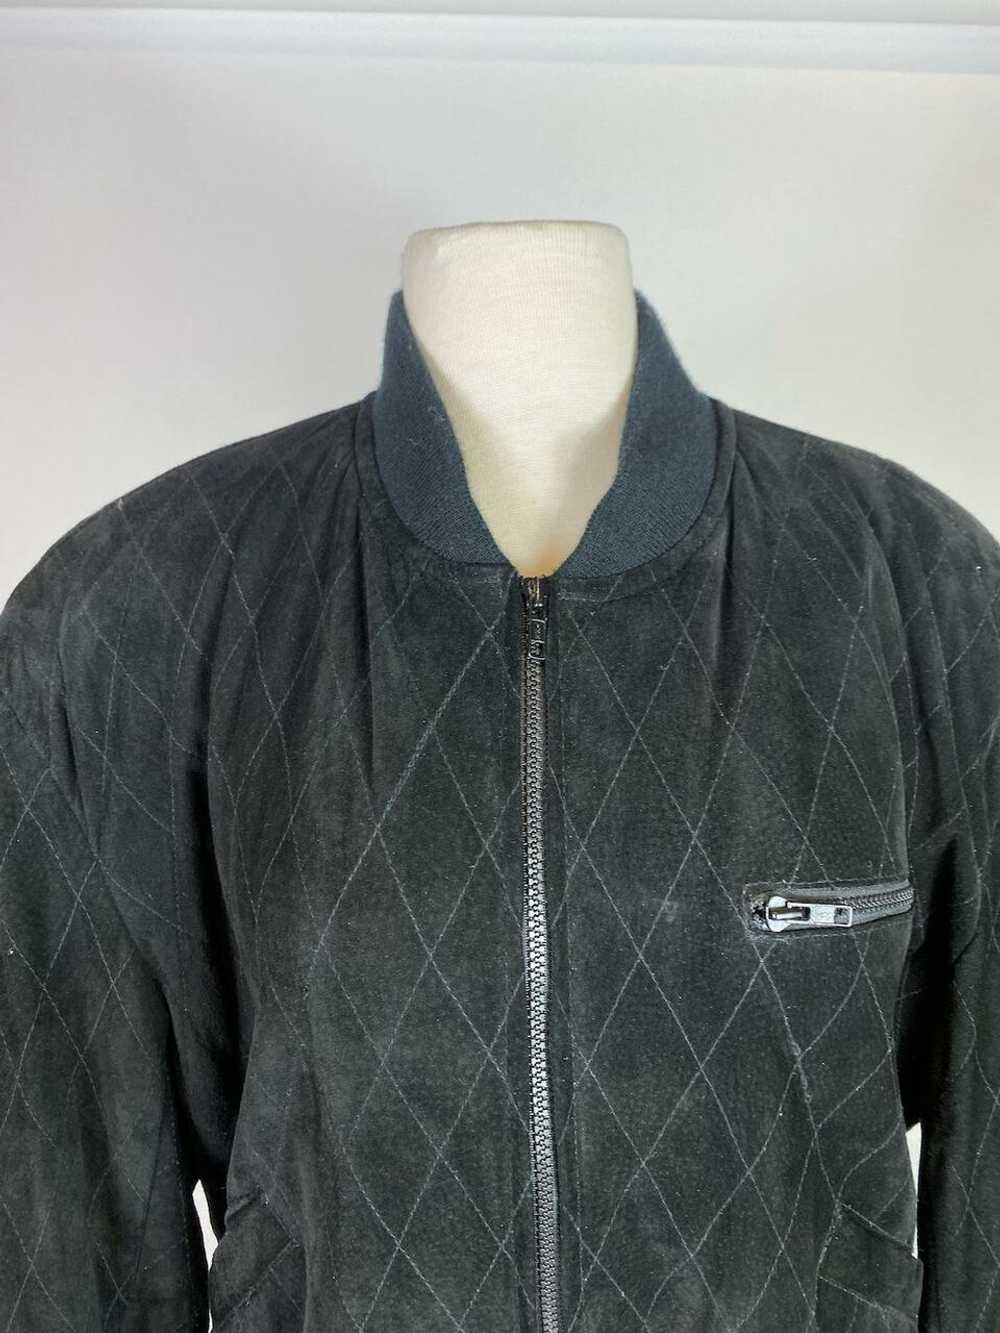 1980s - 1990s Cedars Suede Leather Quilted Jacket - image 5